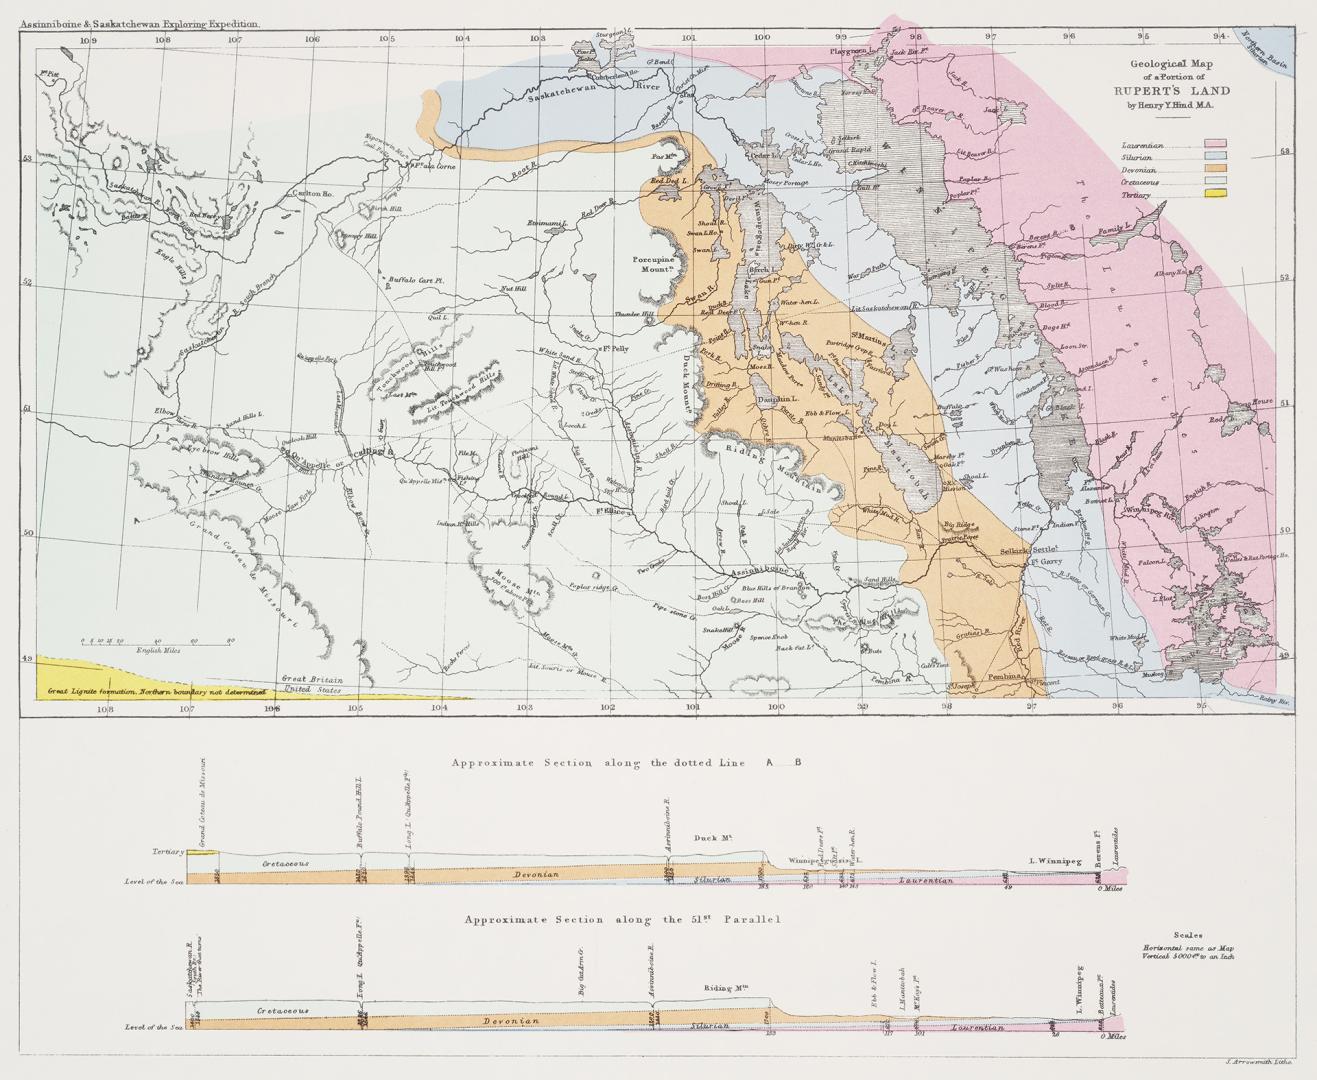 Geological map of a portion of Rupert's Land